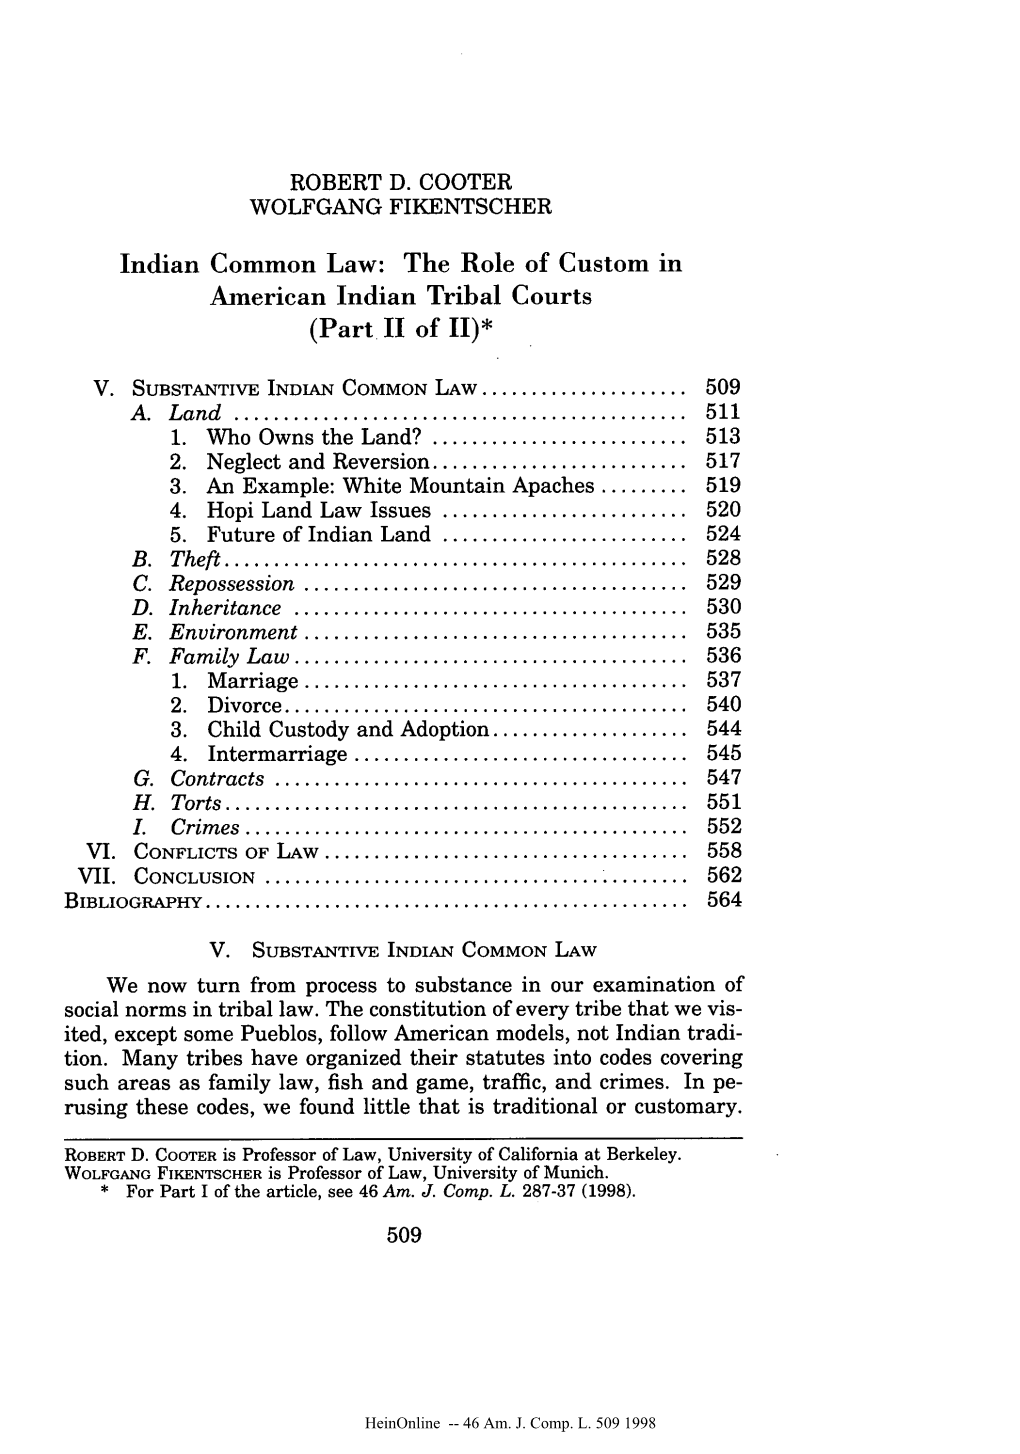 Indian Common Law: the Role of Custom in American Indian Tribal Courts (Part II of II)*